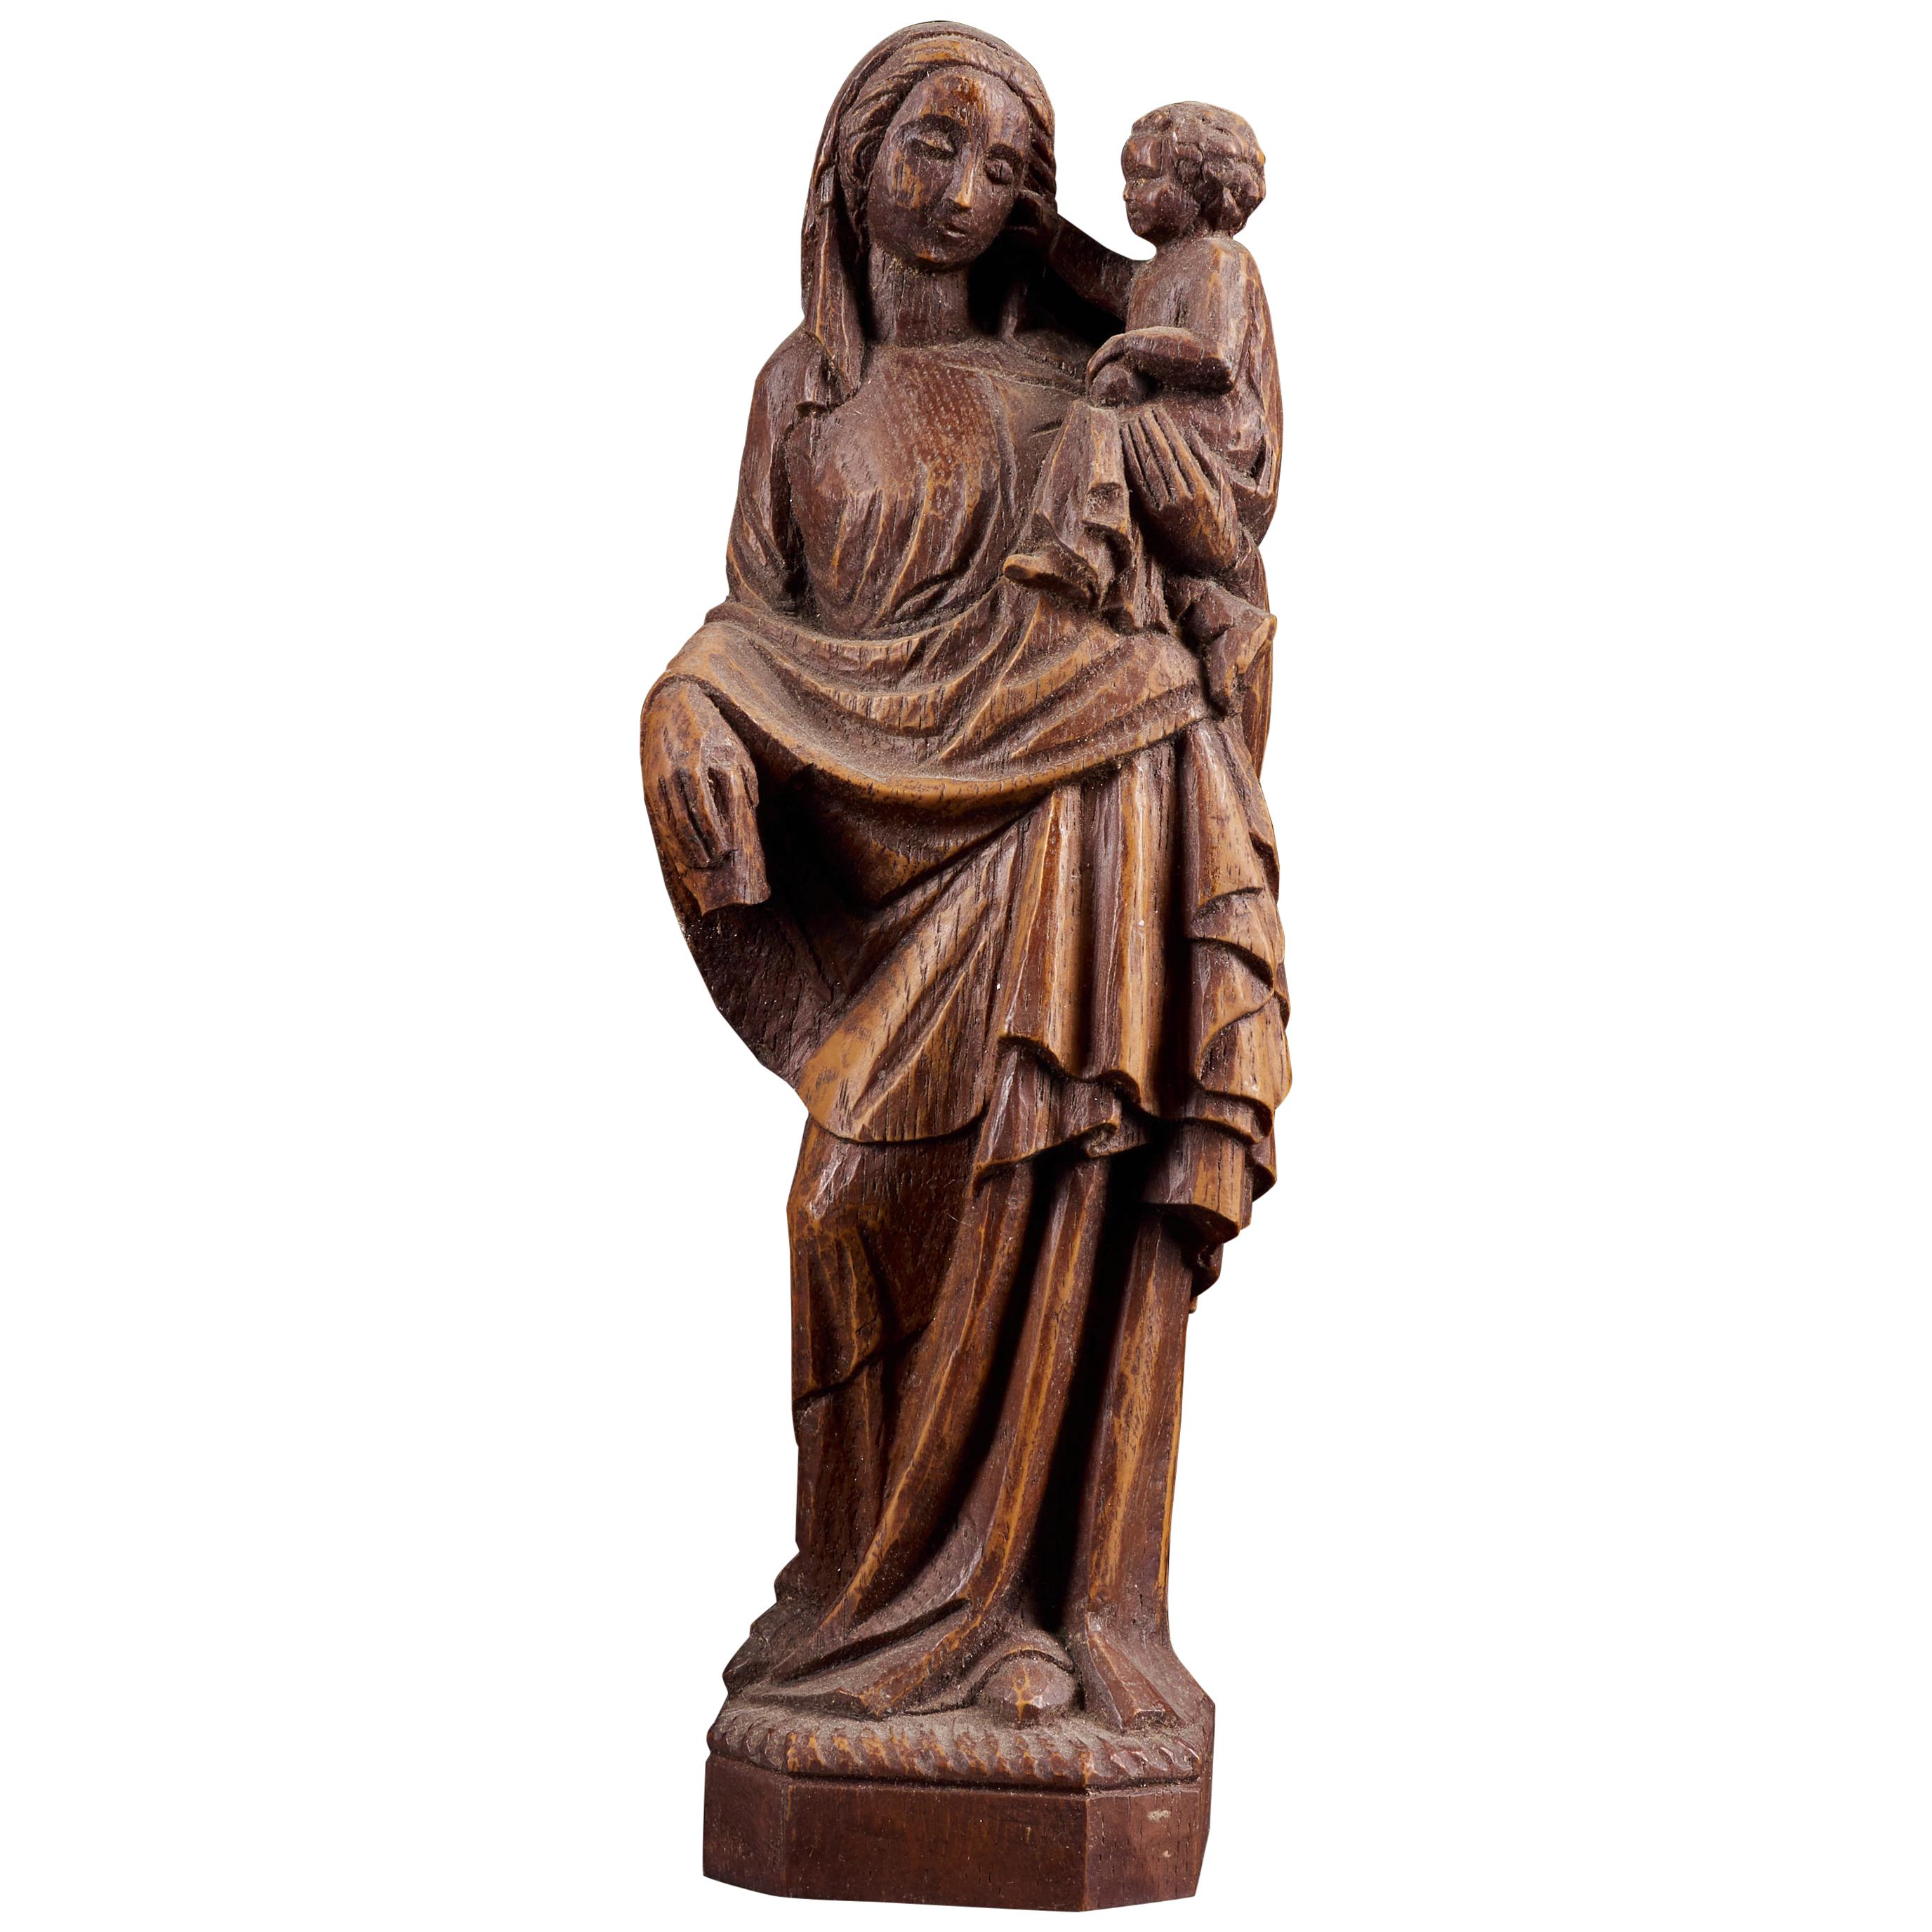 19th Century, Virgin and Child Statue Sculpture Made of Wood with a Nice Patina